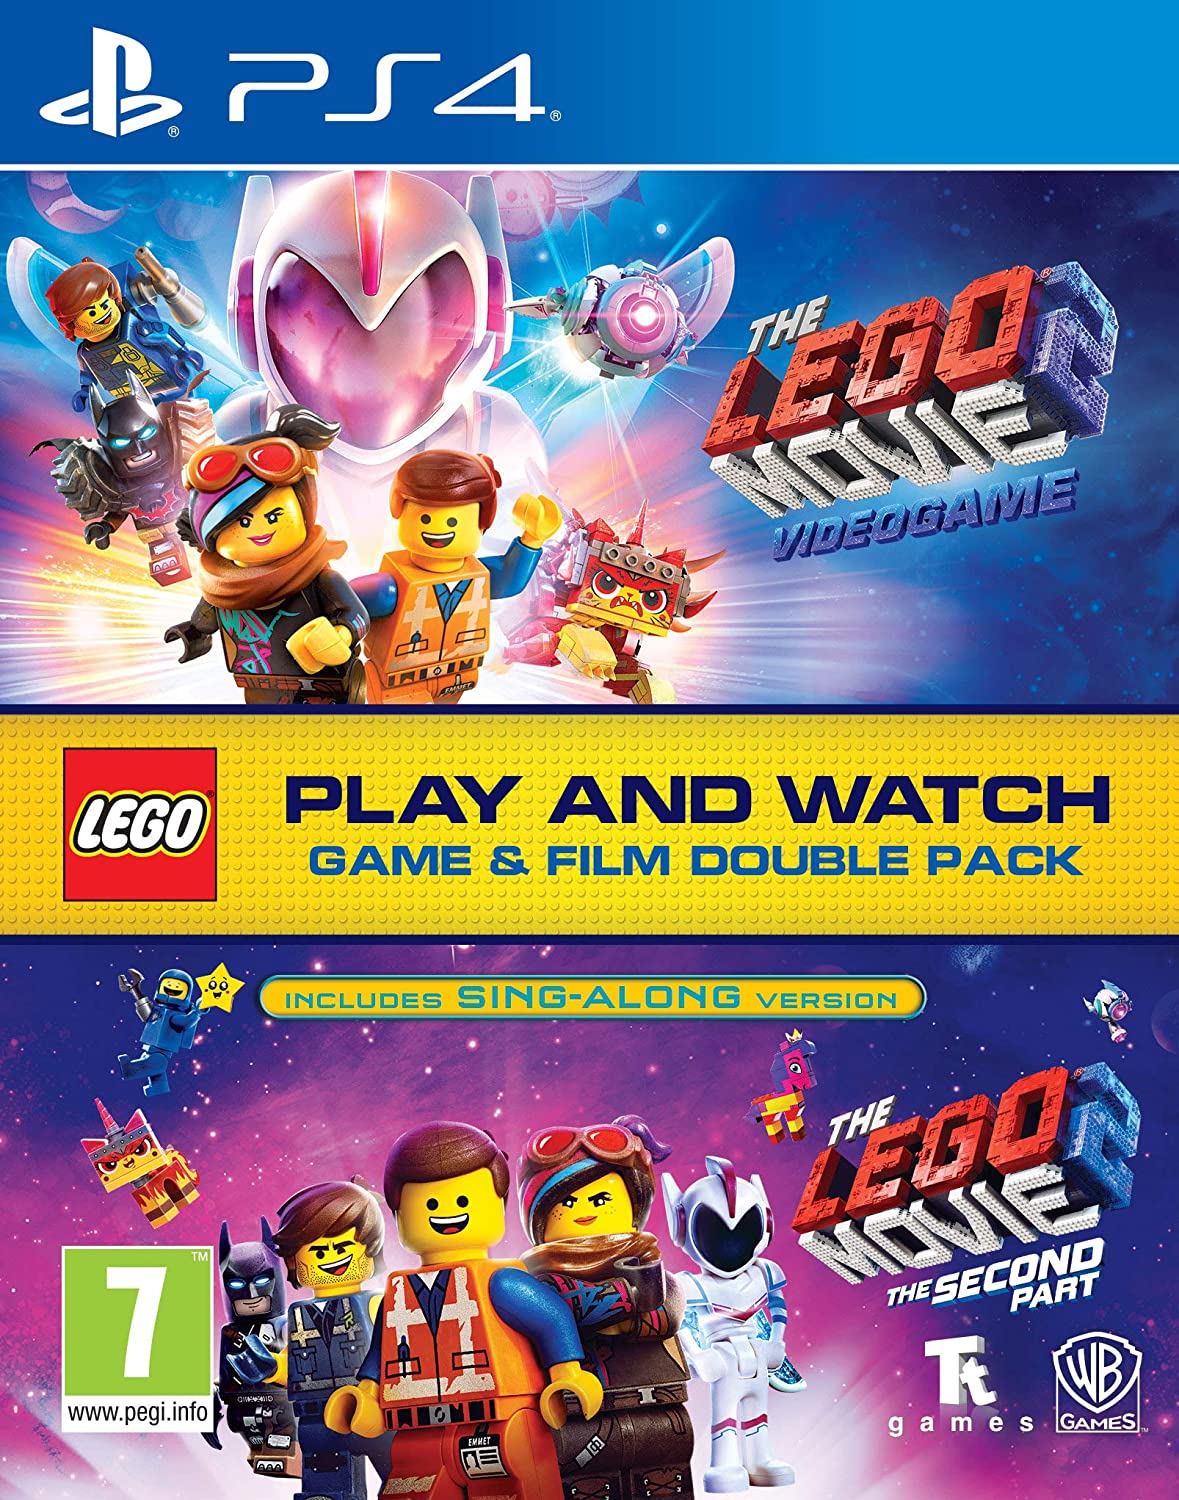 Lego Movie 2 Game & Film Double Pack (EUR)*